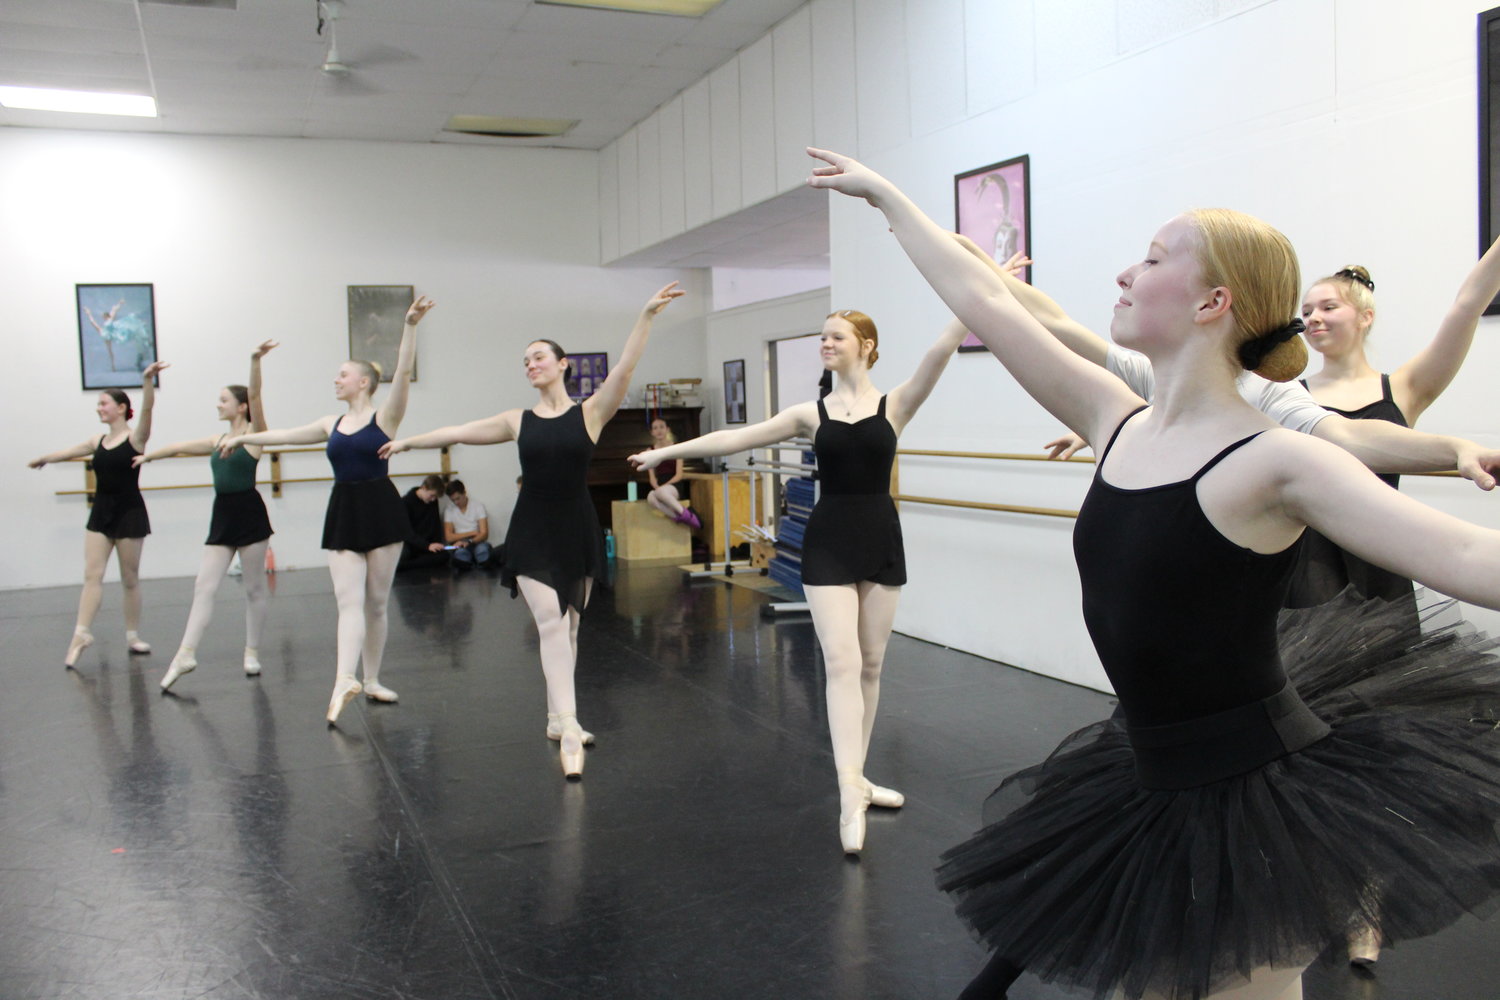 Lydia Smith, as Snow Queen, with Jacob Mecham as the Snow King, rehearse alongside snowflakes Tess McMurry, Kayleigh Lloyd, Brooke Larson, McKenna Bryan, Jamiah Wood and Eliza Wilmot. They will perform in Centralia Ballet Academy's version of "The Nutcracker" Dec. 2-4 at Corbet Theatre in Centralia.